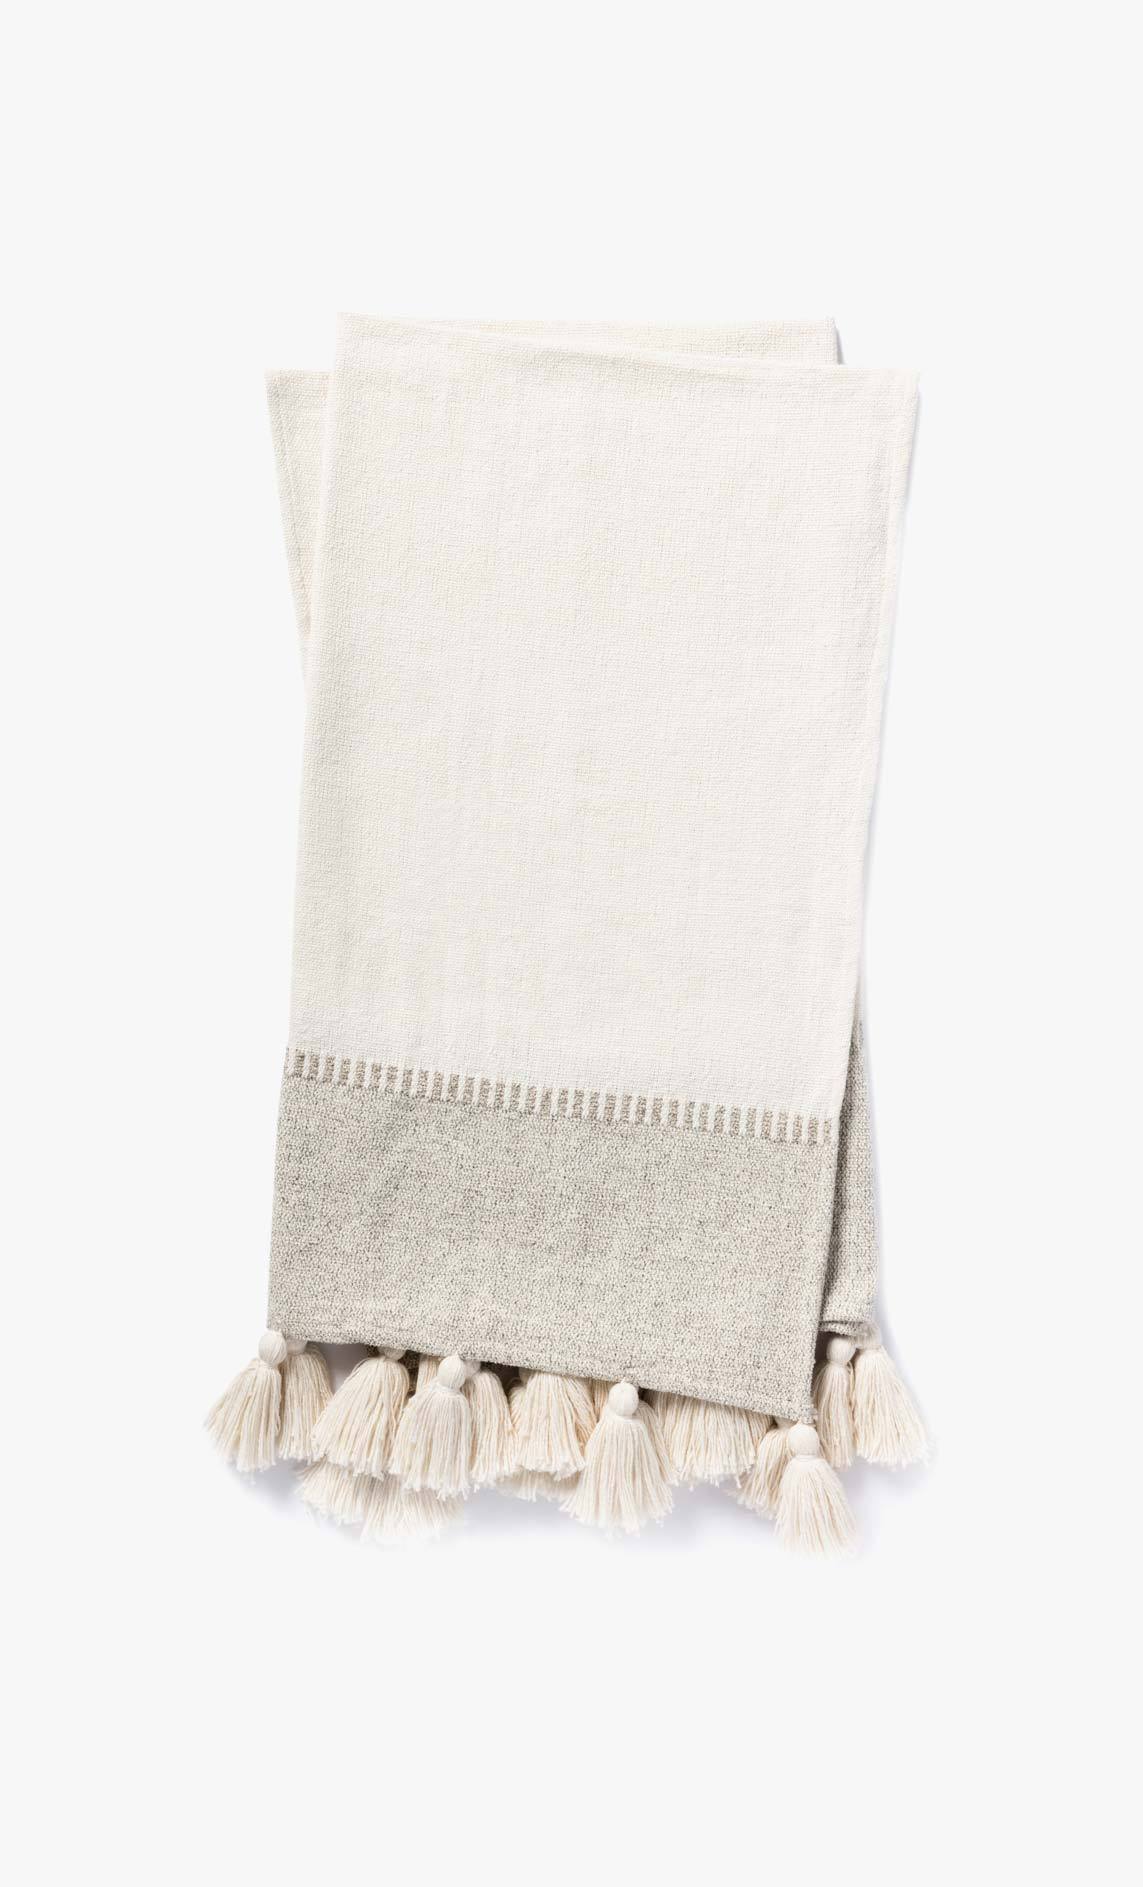 Magnolia Homes Ivey Throw by Loloi